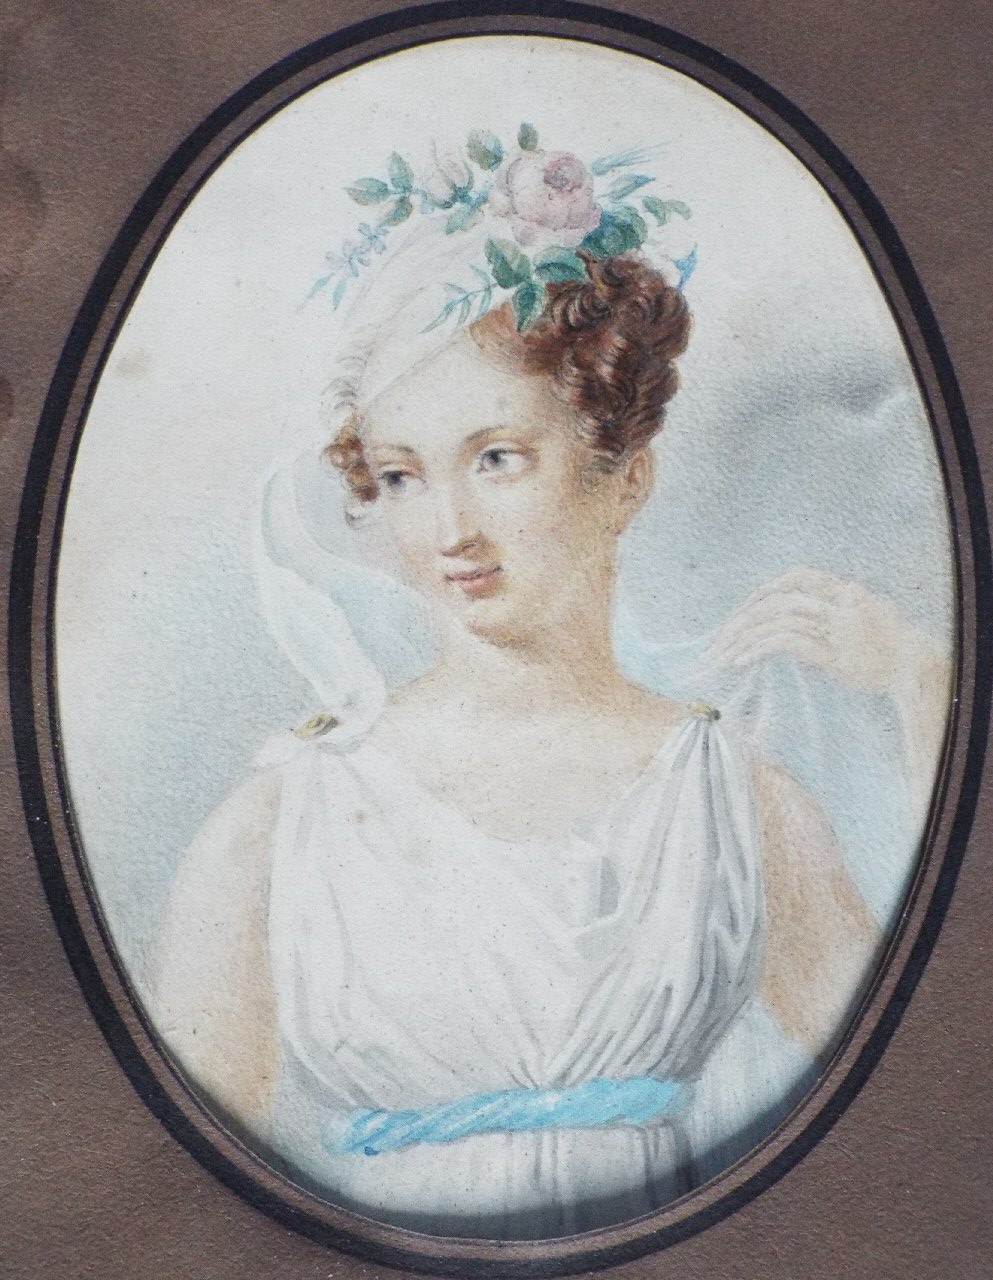 Watercolour - Regency period portrait of a young woman